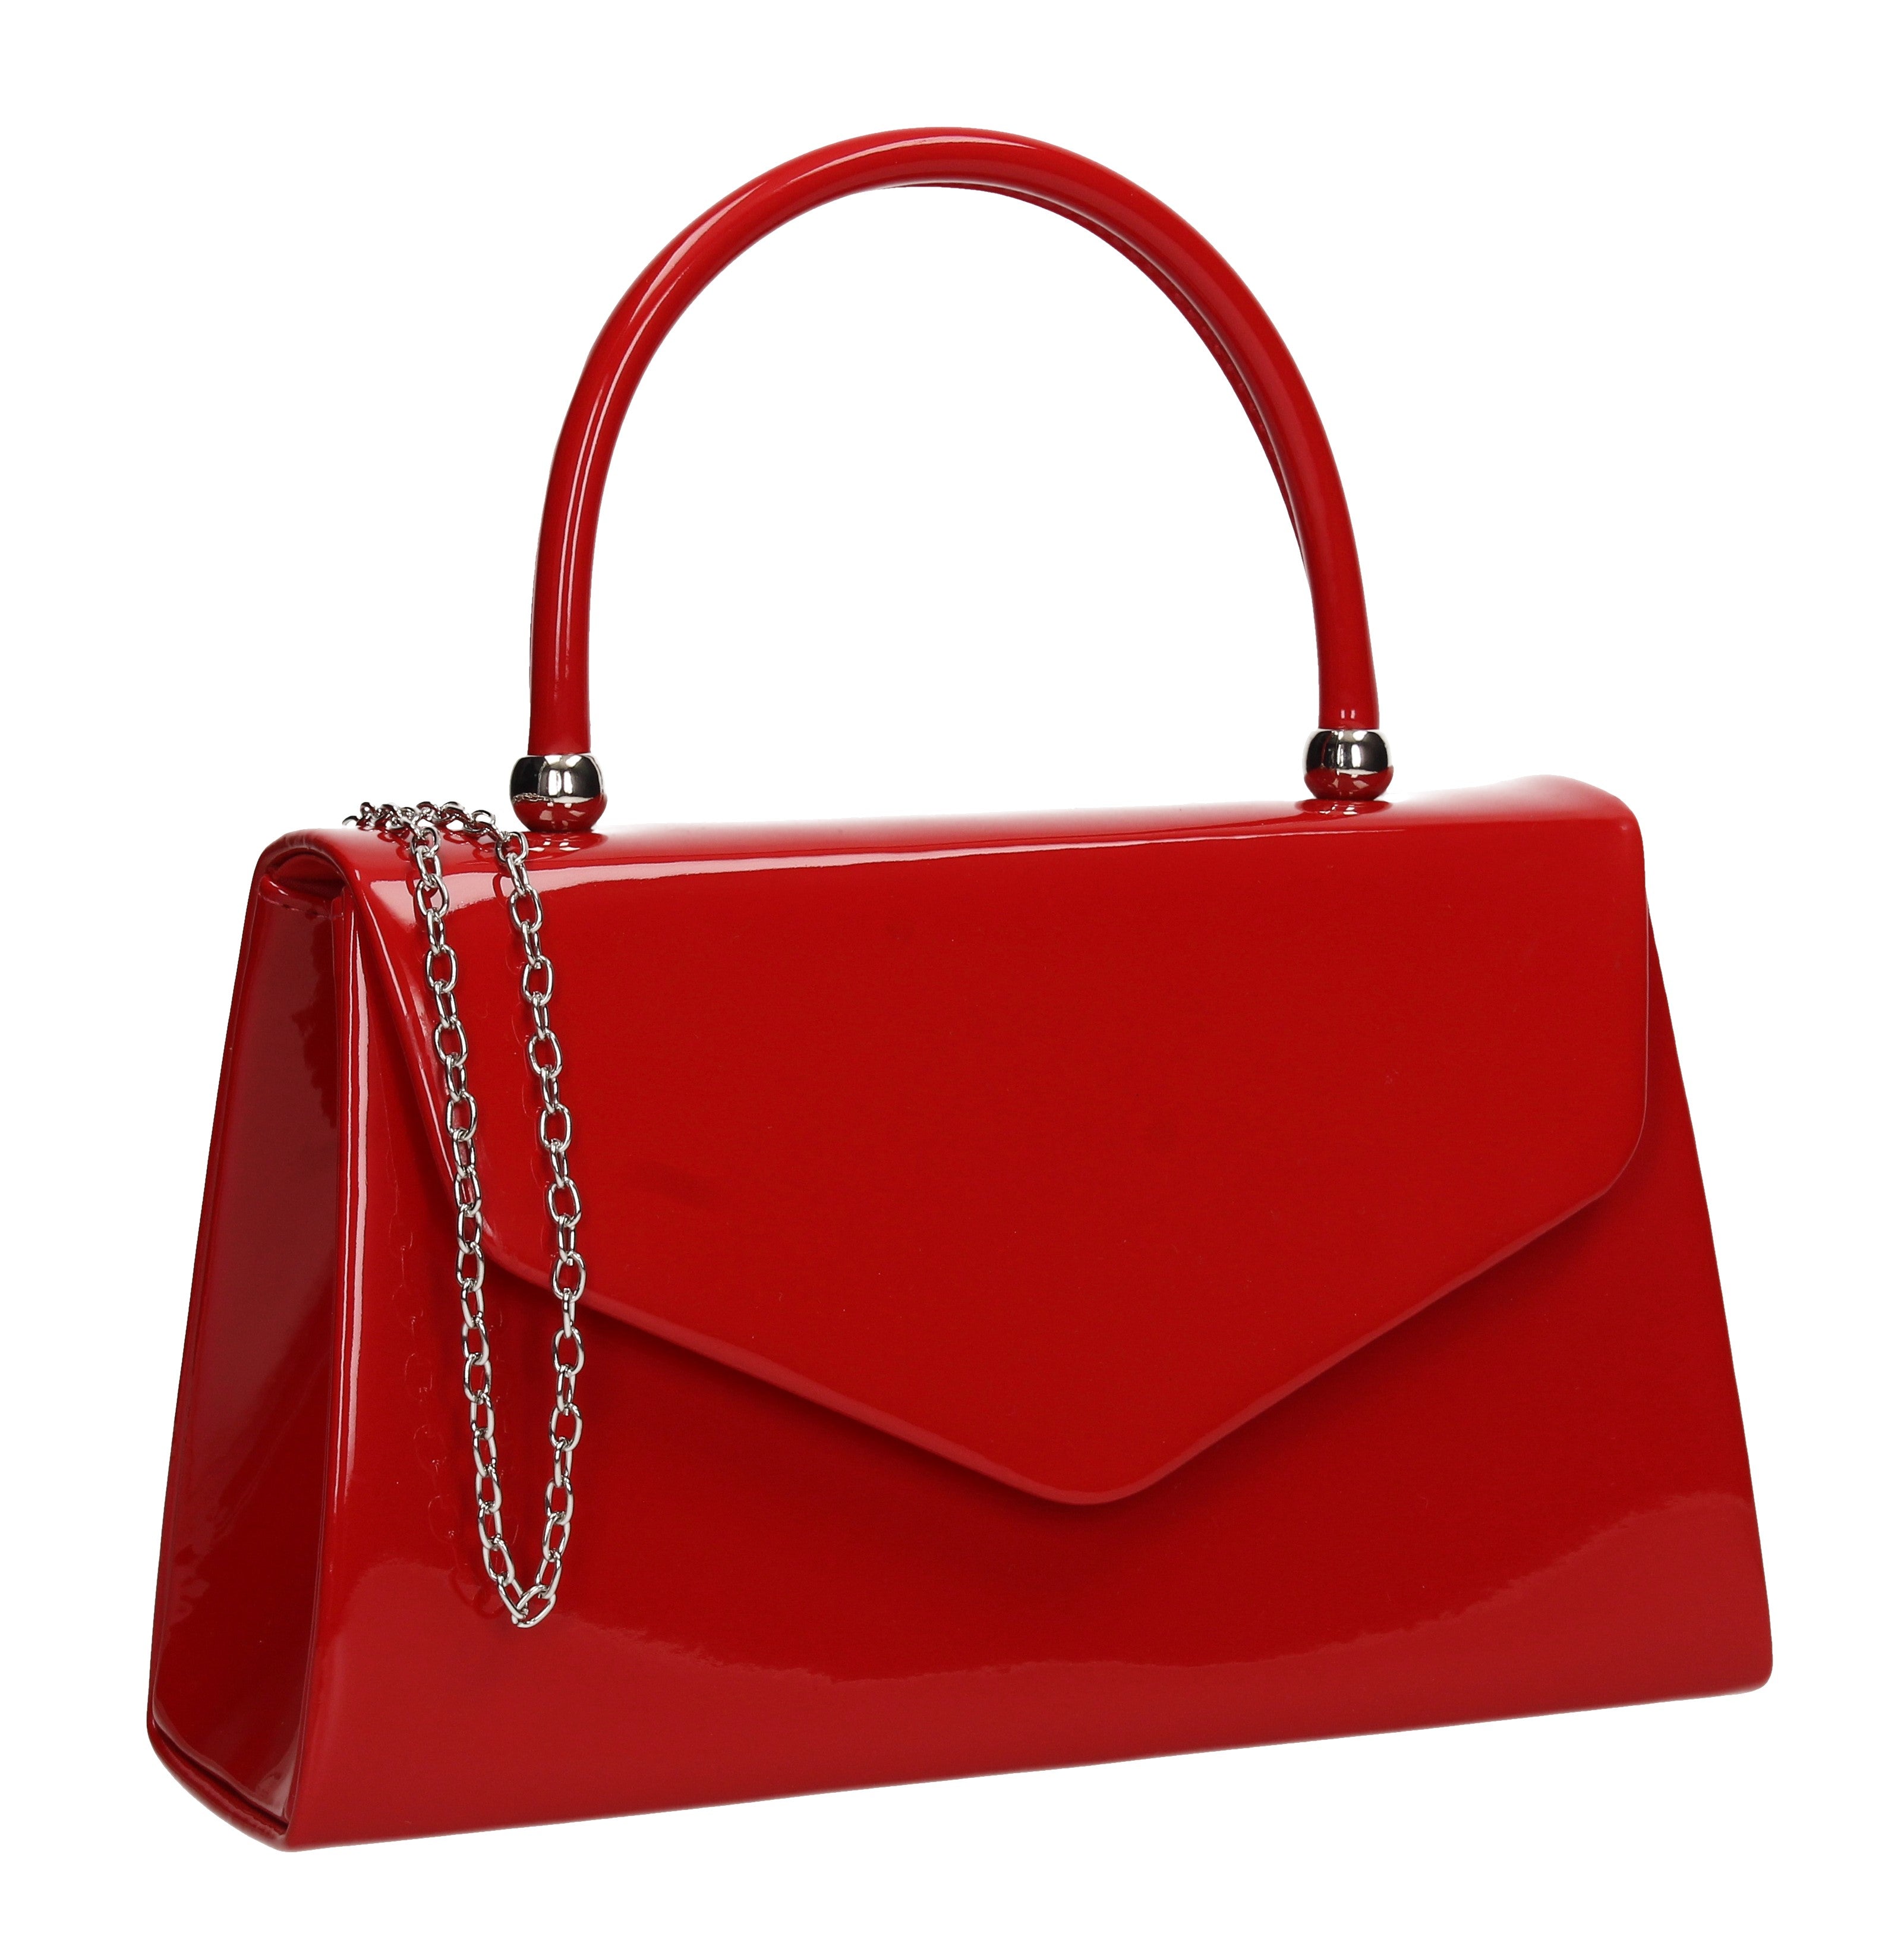 Amazon.com: Red Patent Leather Clutch